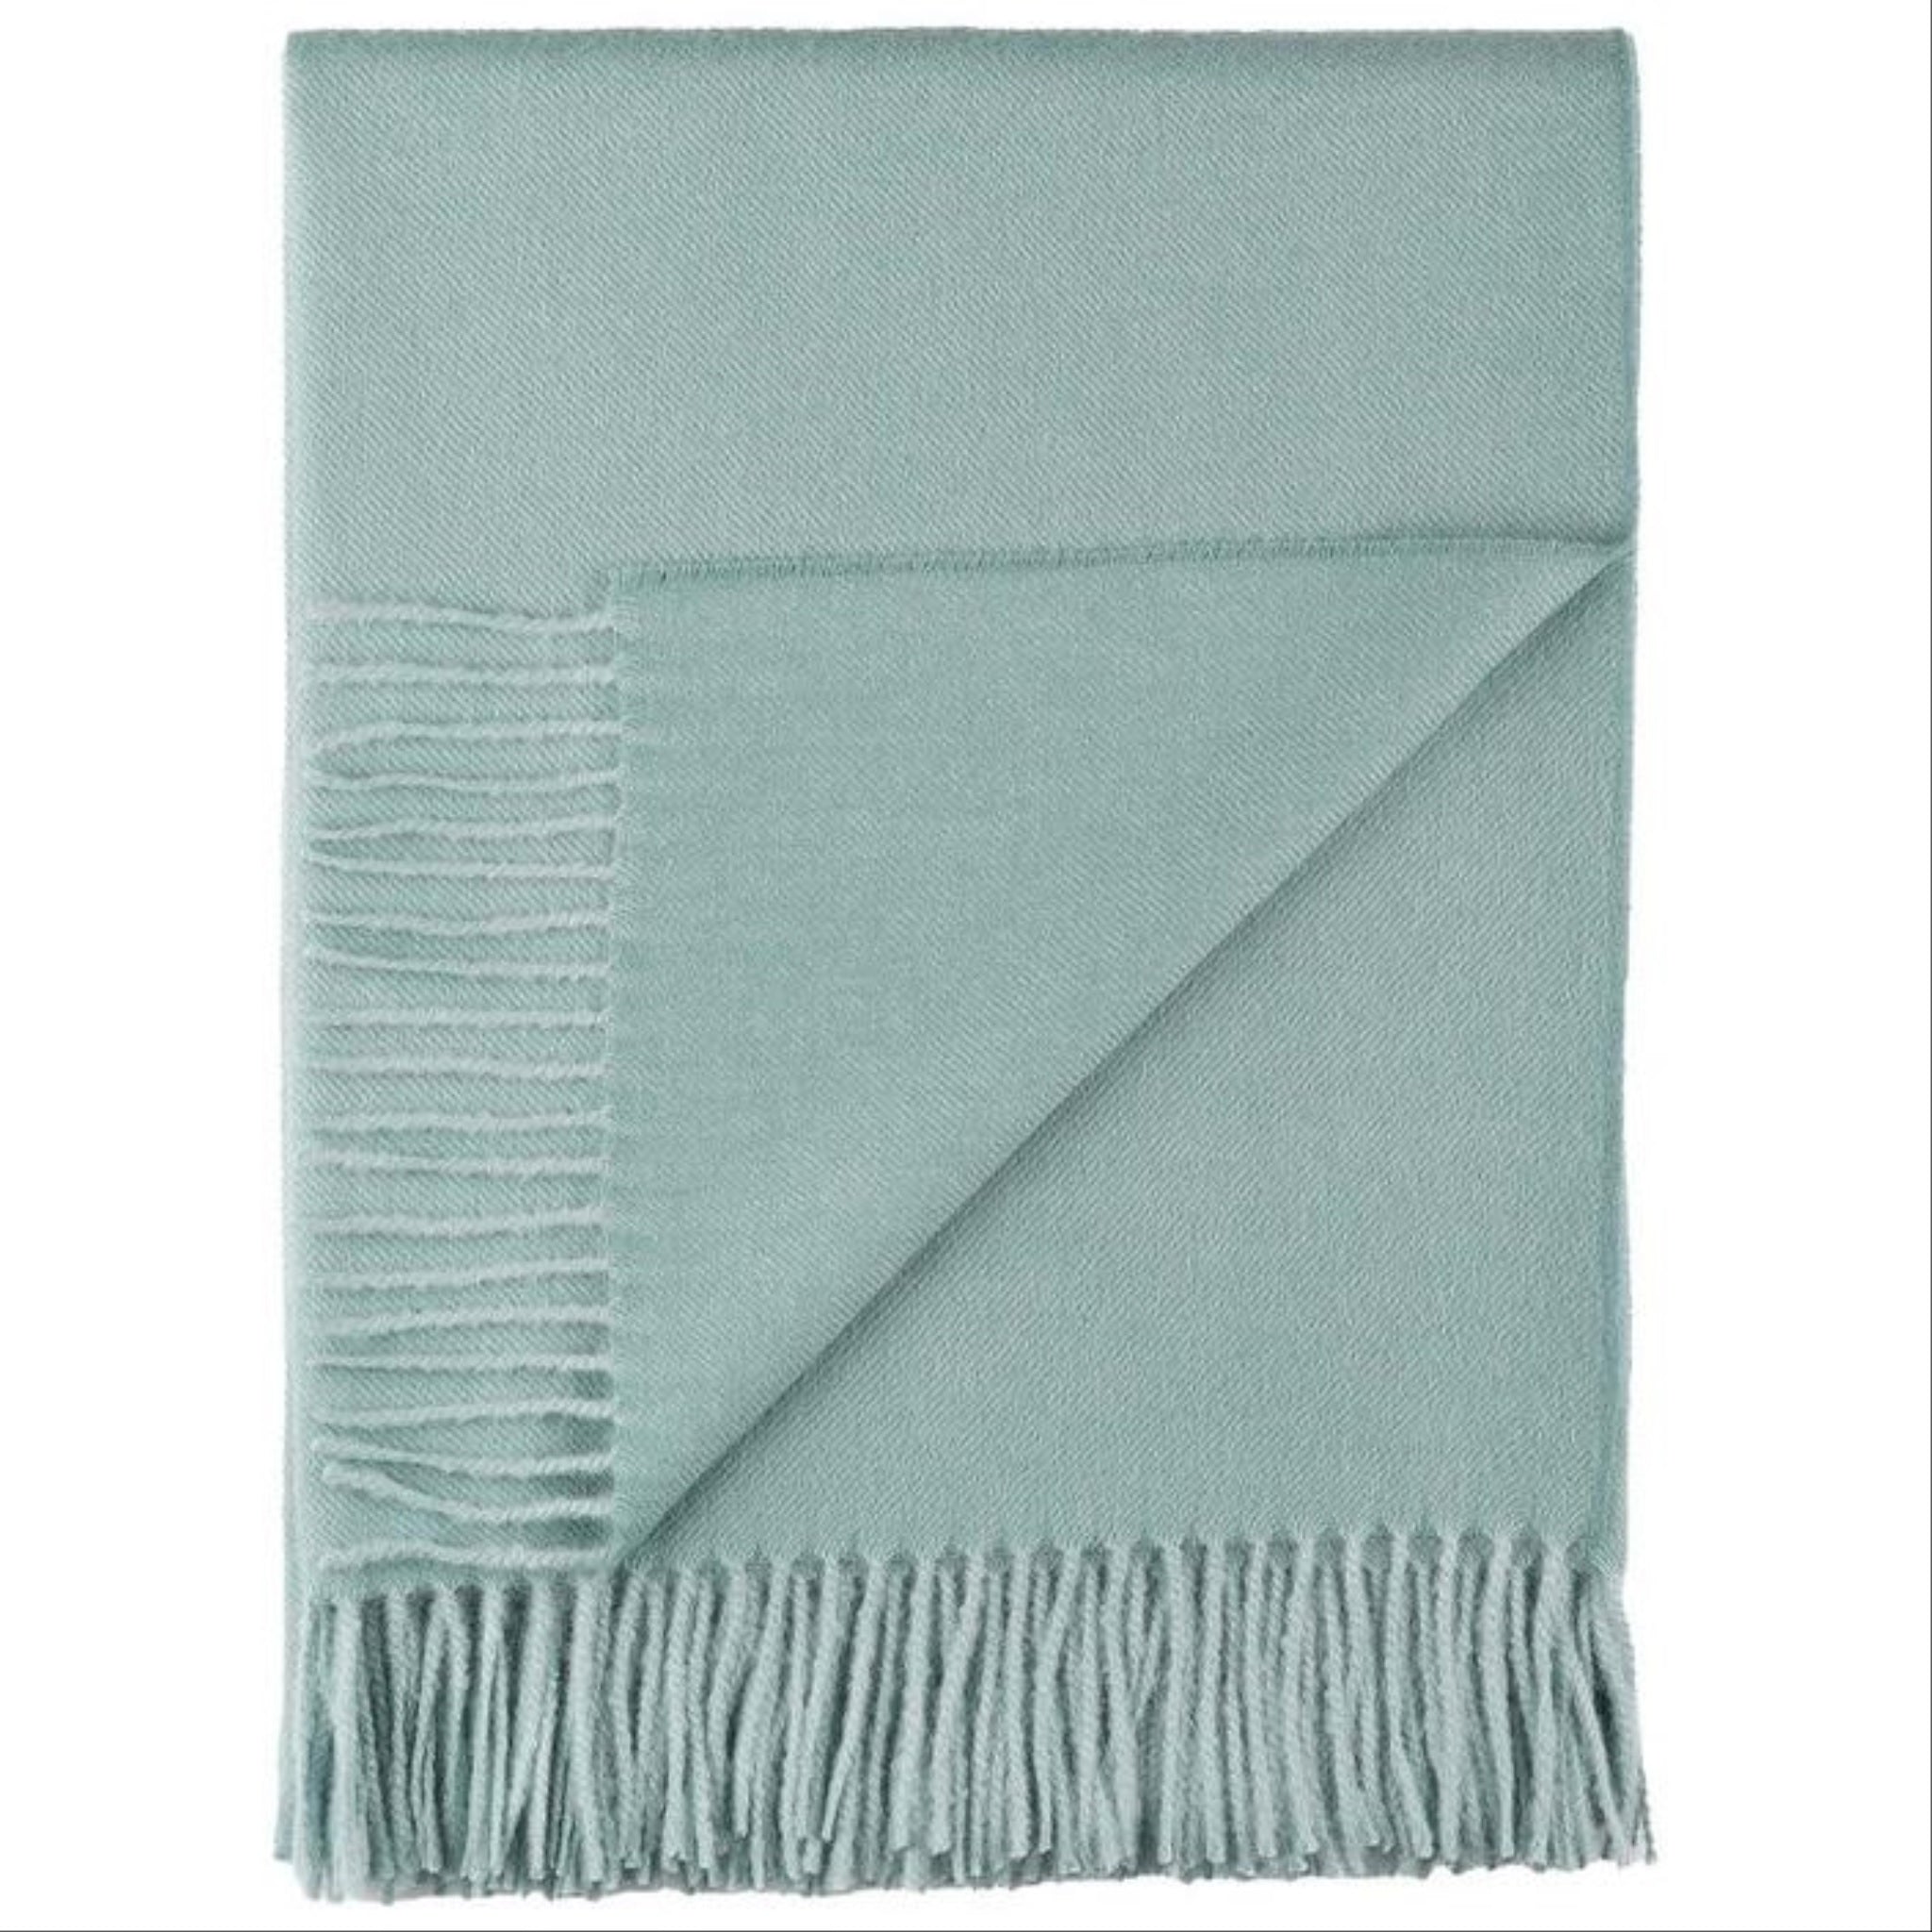 Shop for the Downtown Company Baby Alpaca Throw